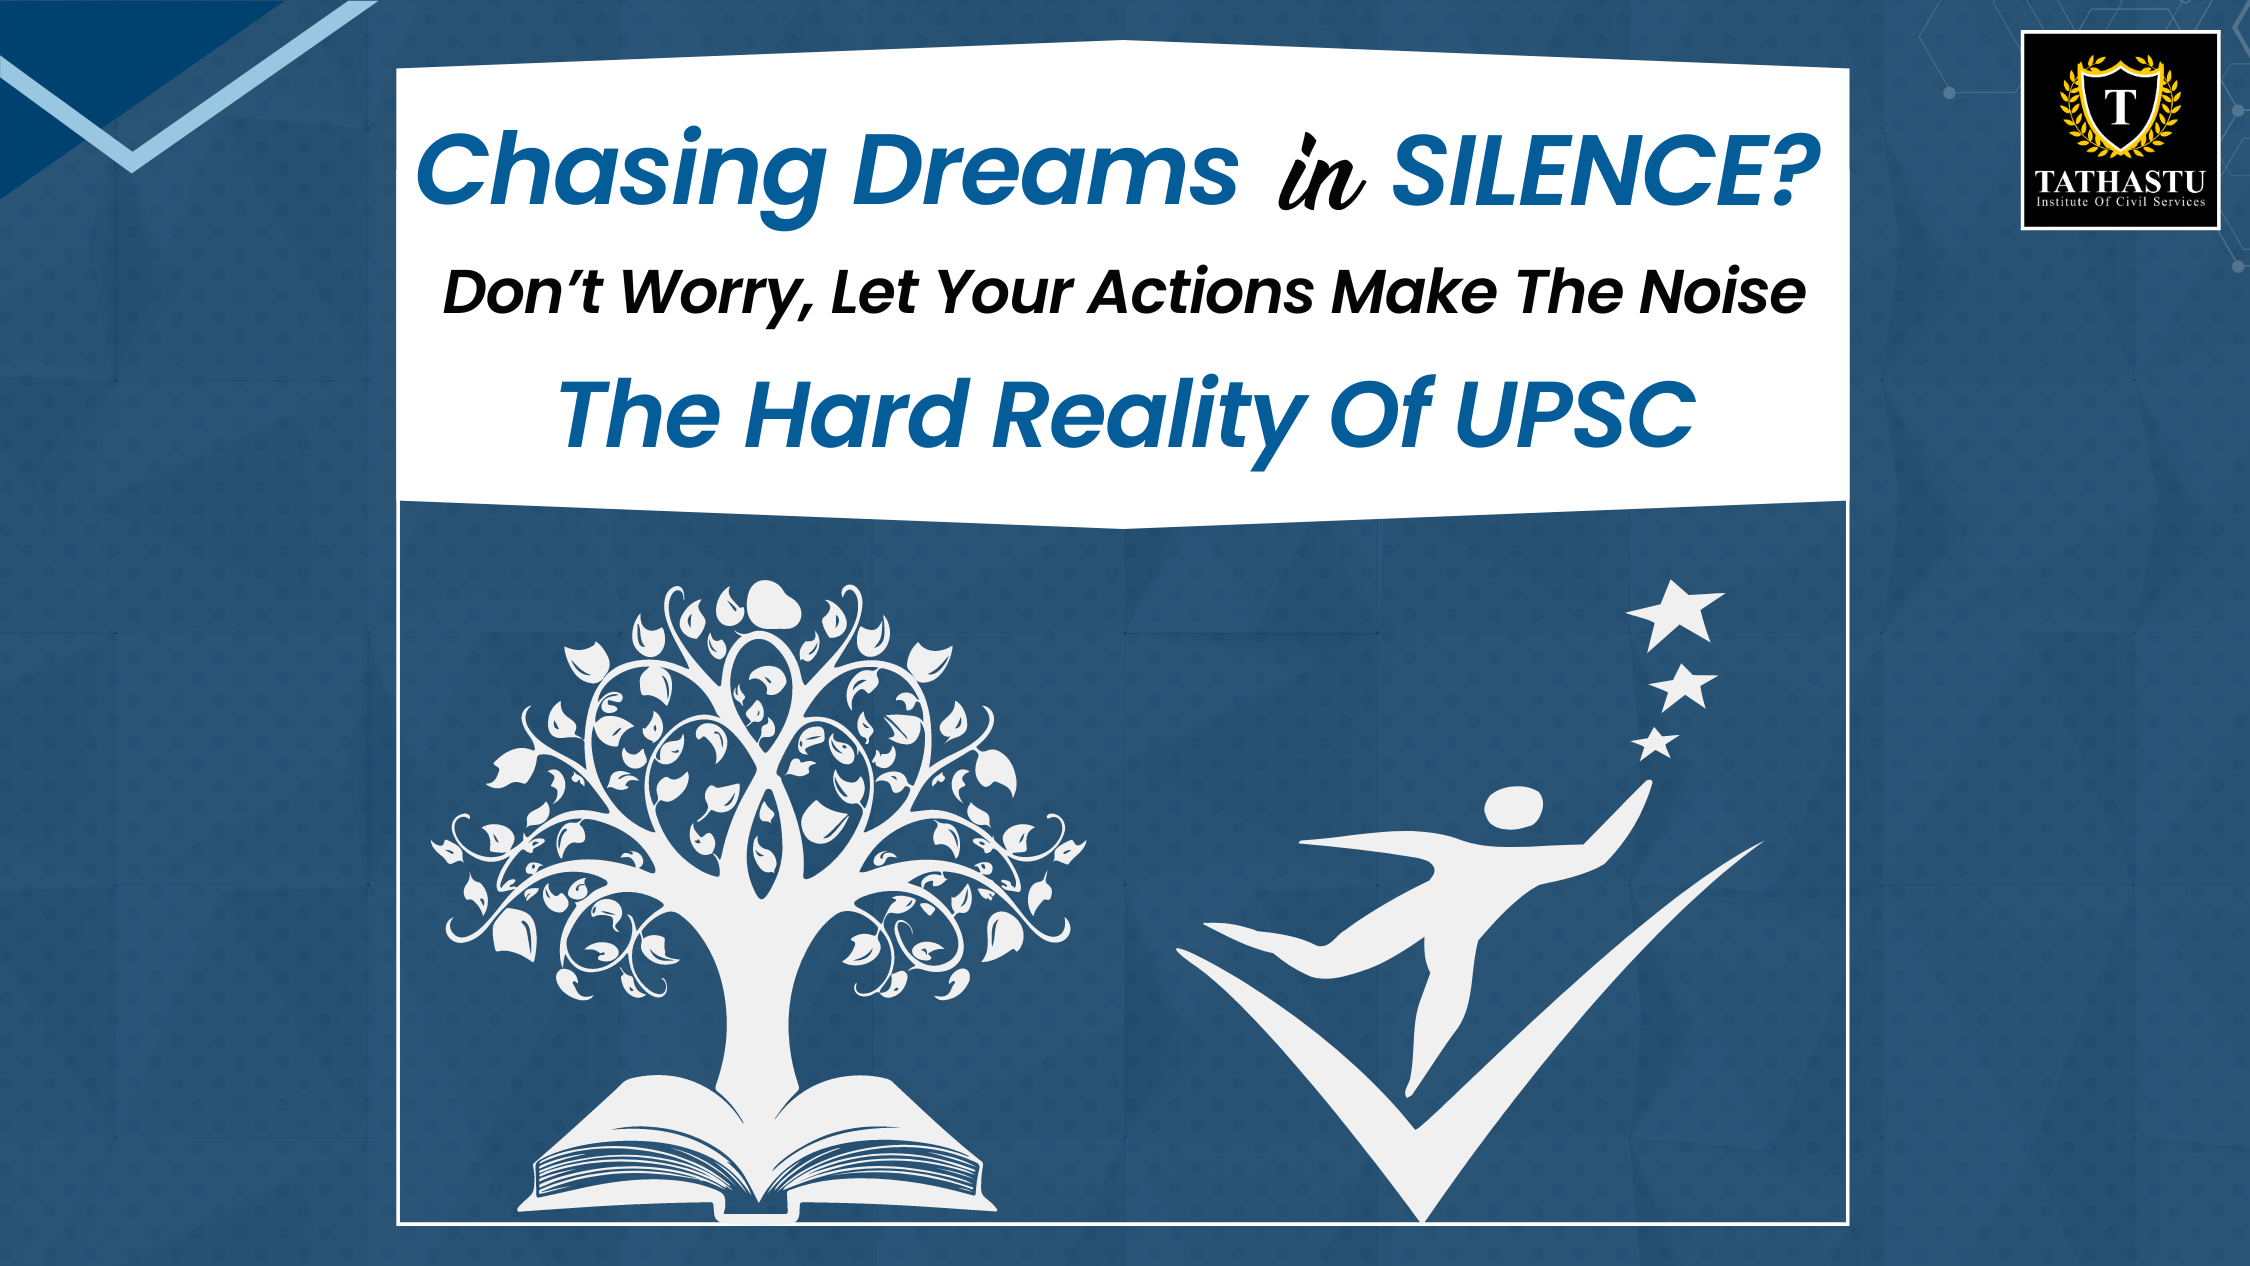 Chasing Dreams In Silence? Don’t Worry - Let Your Actions Make The Noise - The Hard Reality Of UPSC